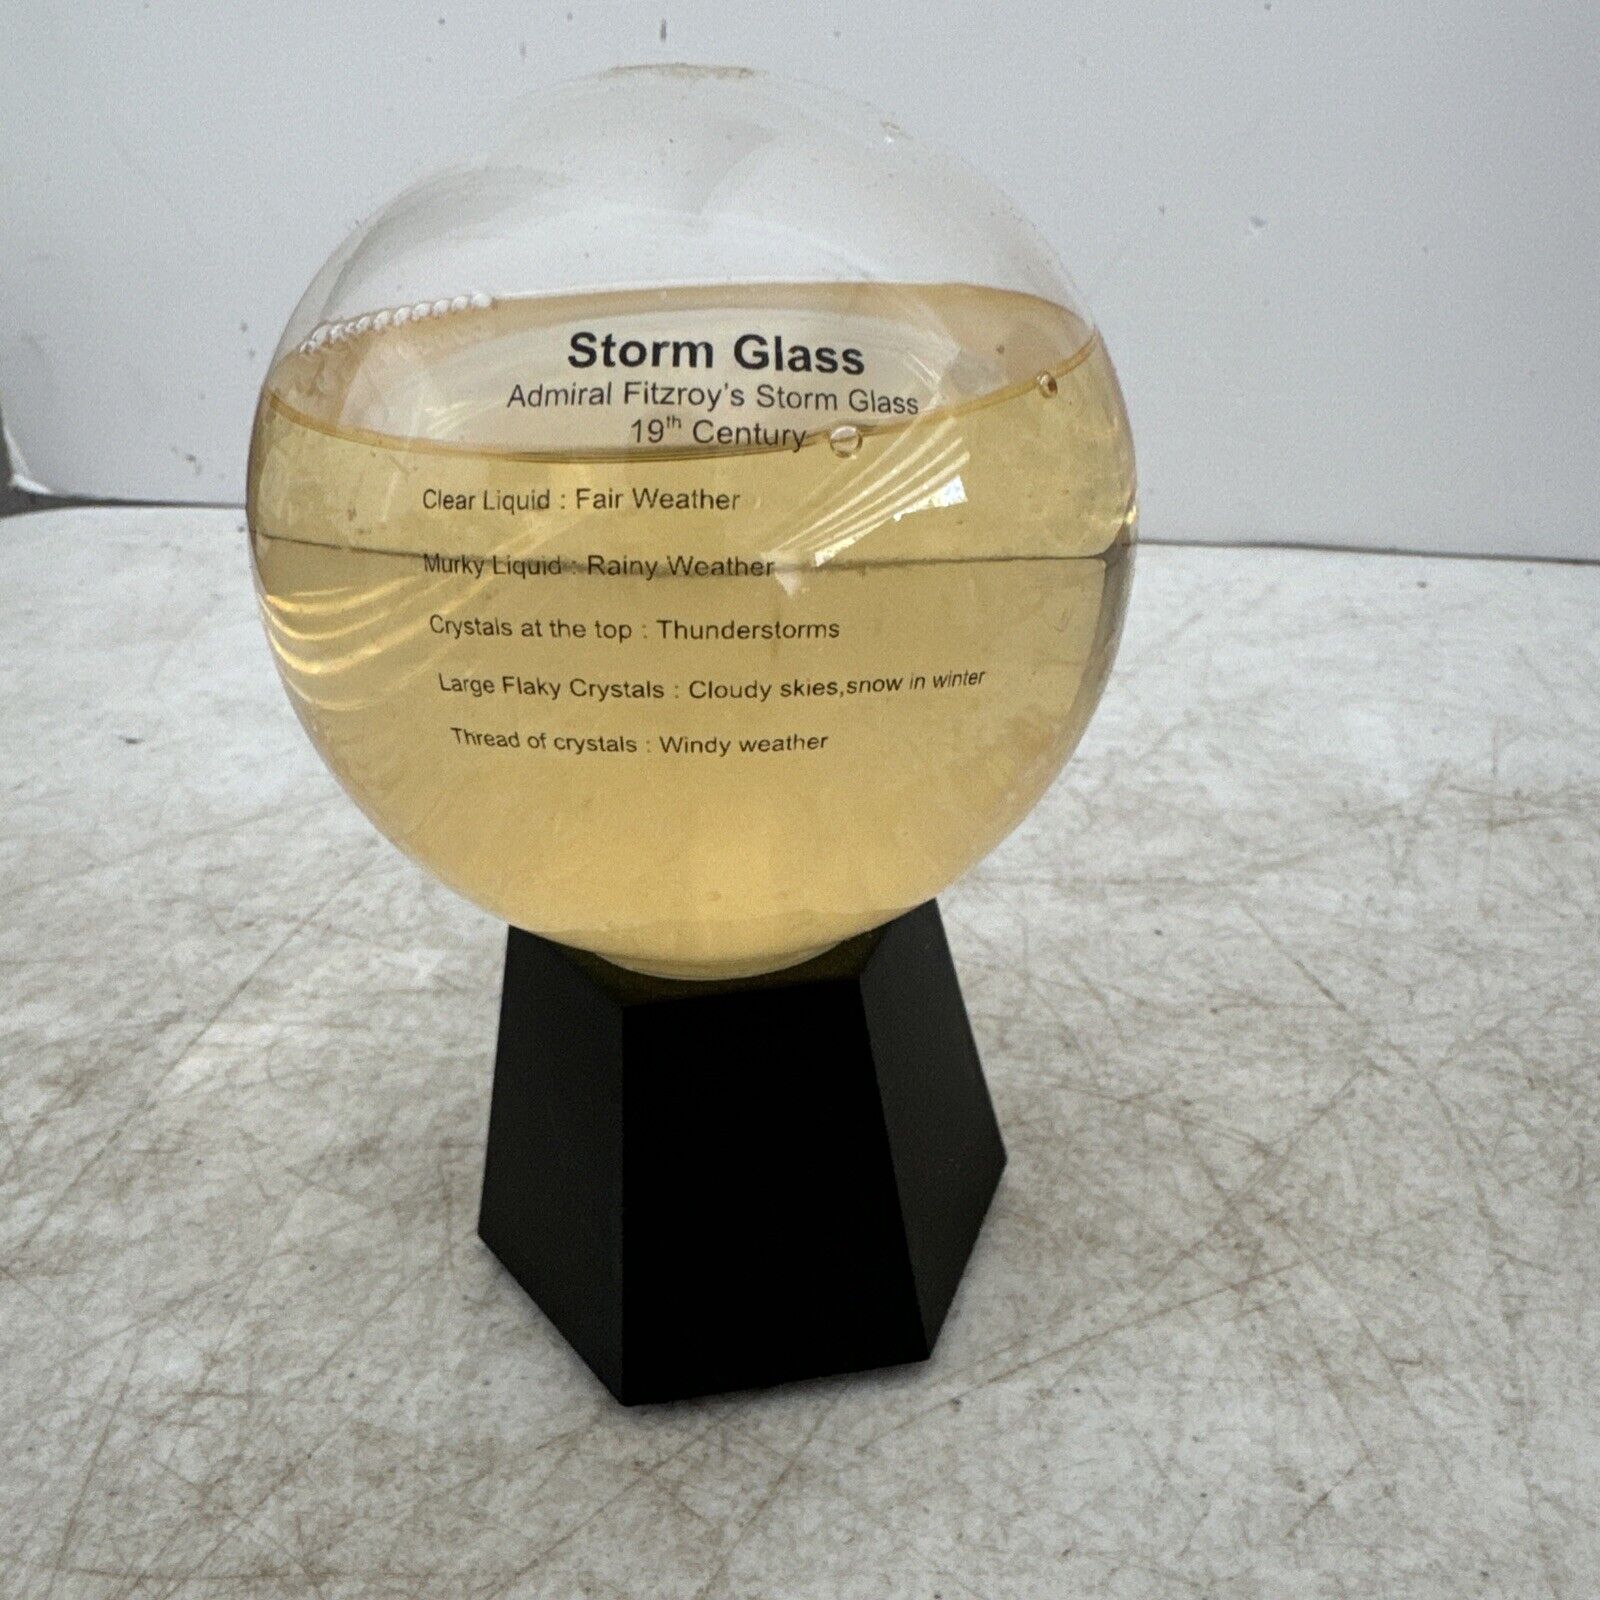 VTG Storm Glass Admiral Fitzroy’s Storm Glass 19th Century